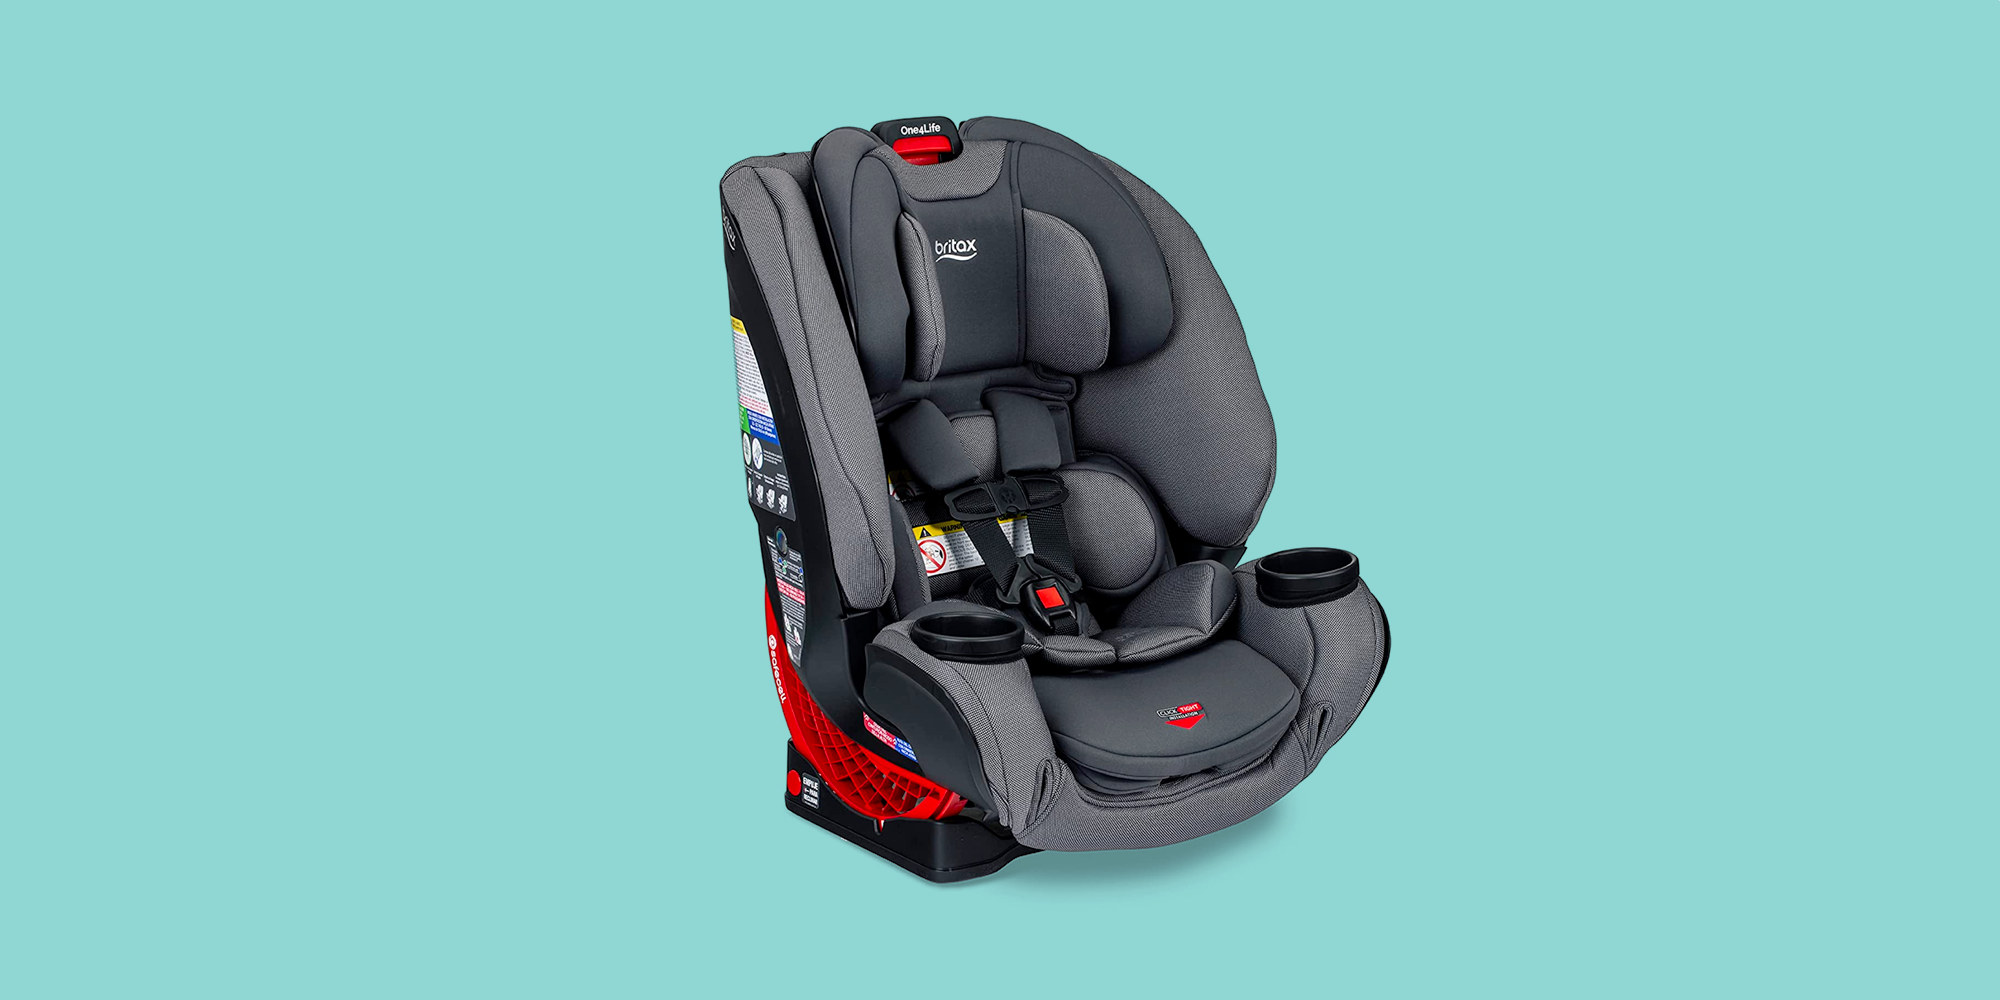 <p><em>We updated this article in May 2023 to include the latest versions of two of our longtime favorites and add two new picks.</em></p><p>Car seat shopping — for your newborn, toddler, young child or beyond — can be a daunting task. The parenting and engineering experts at the <a href="https://www.goodhousekeeping.com/institute/about-the-institute/a19748212/good-housekeeping-institute-product-reviews/">Good Housekeeping Institute</a> have tested dozens of car seats so we can help you make the best pick no matter the age or stage of your child. As parents ourselves, we know that safety is a top concern, and car seats are absolutely necessary for keeping children safe in a vehicle. </p><p>We've evaluated <strong>25 car seats in the last six years based on safety compliance, ease of use, safety features, functionality and value. </strong>We conduct evaluations in the Lab as well as in different vehicles and then have our <a href="https://www.goodhousekeeping.com/institute/about-the-institute/a36050588/gh-institute-product-tester/">consumer testers</a> test them out in their everyday lives.</p><p>Car seats reduce the risk of death by as much as 71% when used correctly, according to <a href="https://www.safekids.org/car-seat">Safe Kids Worldwide</a>. That's why every state in the nation has <a href="https://www.ghsa.org/state-laws/issues/child%20passenger%20safety">car-seat laws</a>, particularly for kids age 5 and younger.</p><p>For parents, there's a lot to get acquainted with when it comes to car seats: when to turn from rear-facing to forward-facing (usually not before age 2), the simplicity of the LATCH system, the Herculean strength sometimes required to get a secure fit and the benefit of a removable, washable car seat cover. In general, when determining the right car seat for your family, you’ll want to factor in the ease of installation (including if it has built-in level indicators), ease of cleaning (largely based on fabric and removability) and stroller compatibility (only related to infant car seats). Of course, the most important thing of all is that the car seat actually fits well in your car and that it's installed properly. For that, we recommend you get a <a href="https://www.nhtsa.gov/equipment/car-seats-and-booster-seats#installation-help-inspection">car-seat check</a>.</p><p>After you’ve checked out our recommendations, keep scrolling to find more info on how we test car seats, what features to look for when shopping, and how to make sure you select the best fit for your child. </p>